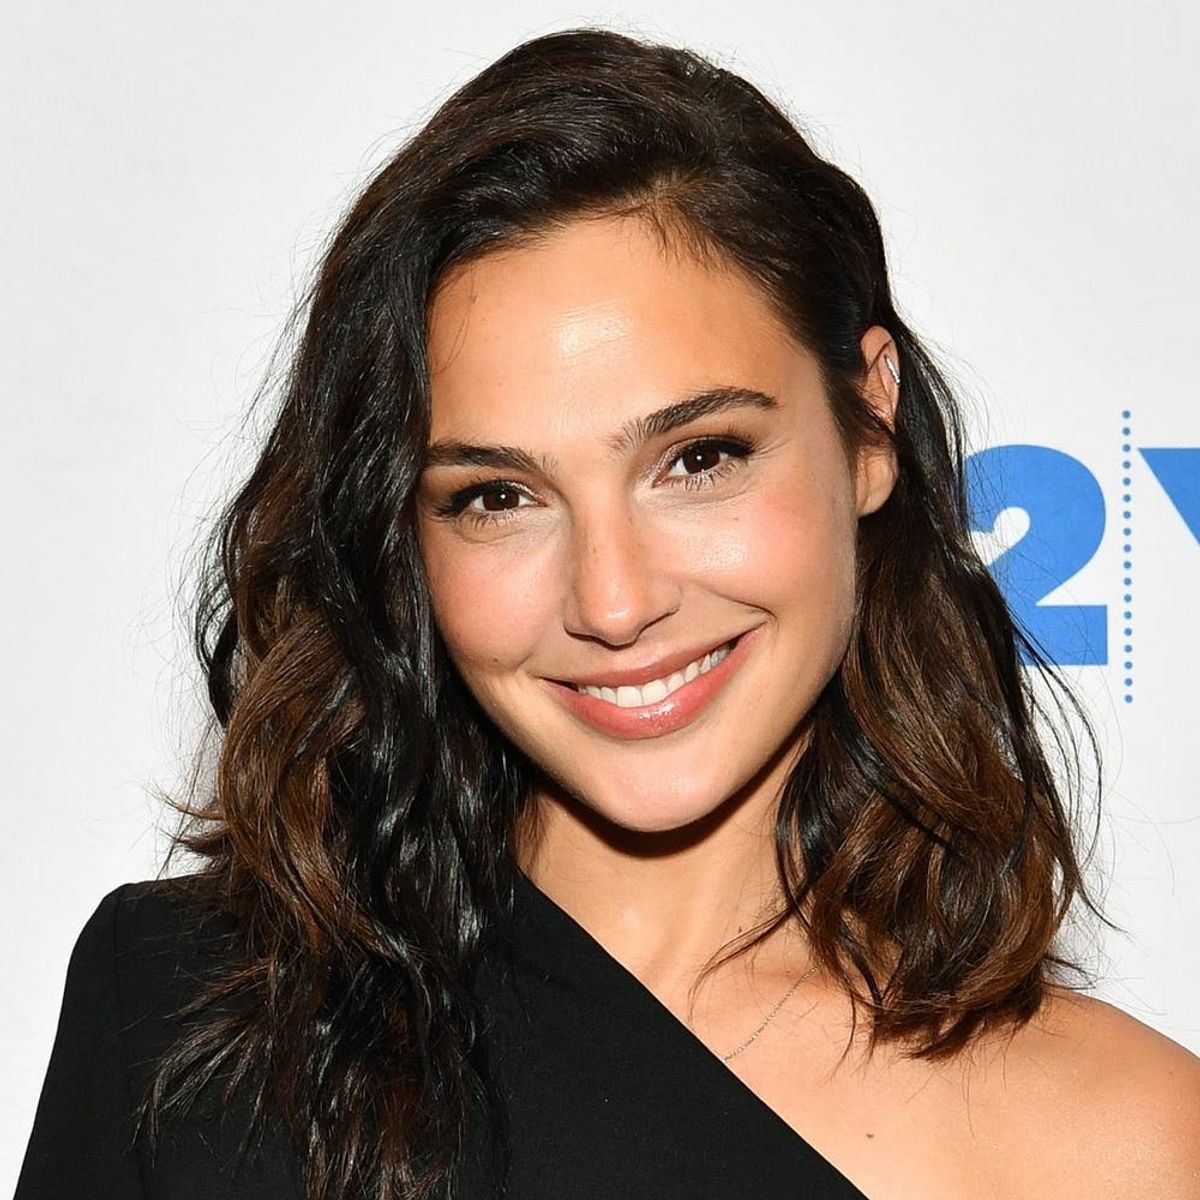 Gal Gadot Just Tried *This* Surprising Food for the First Time on TV